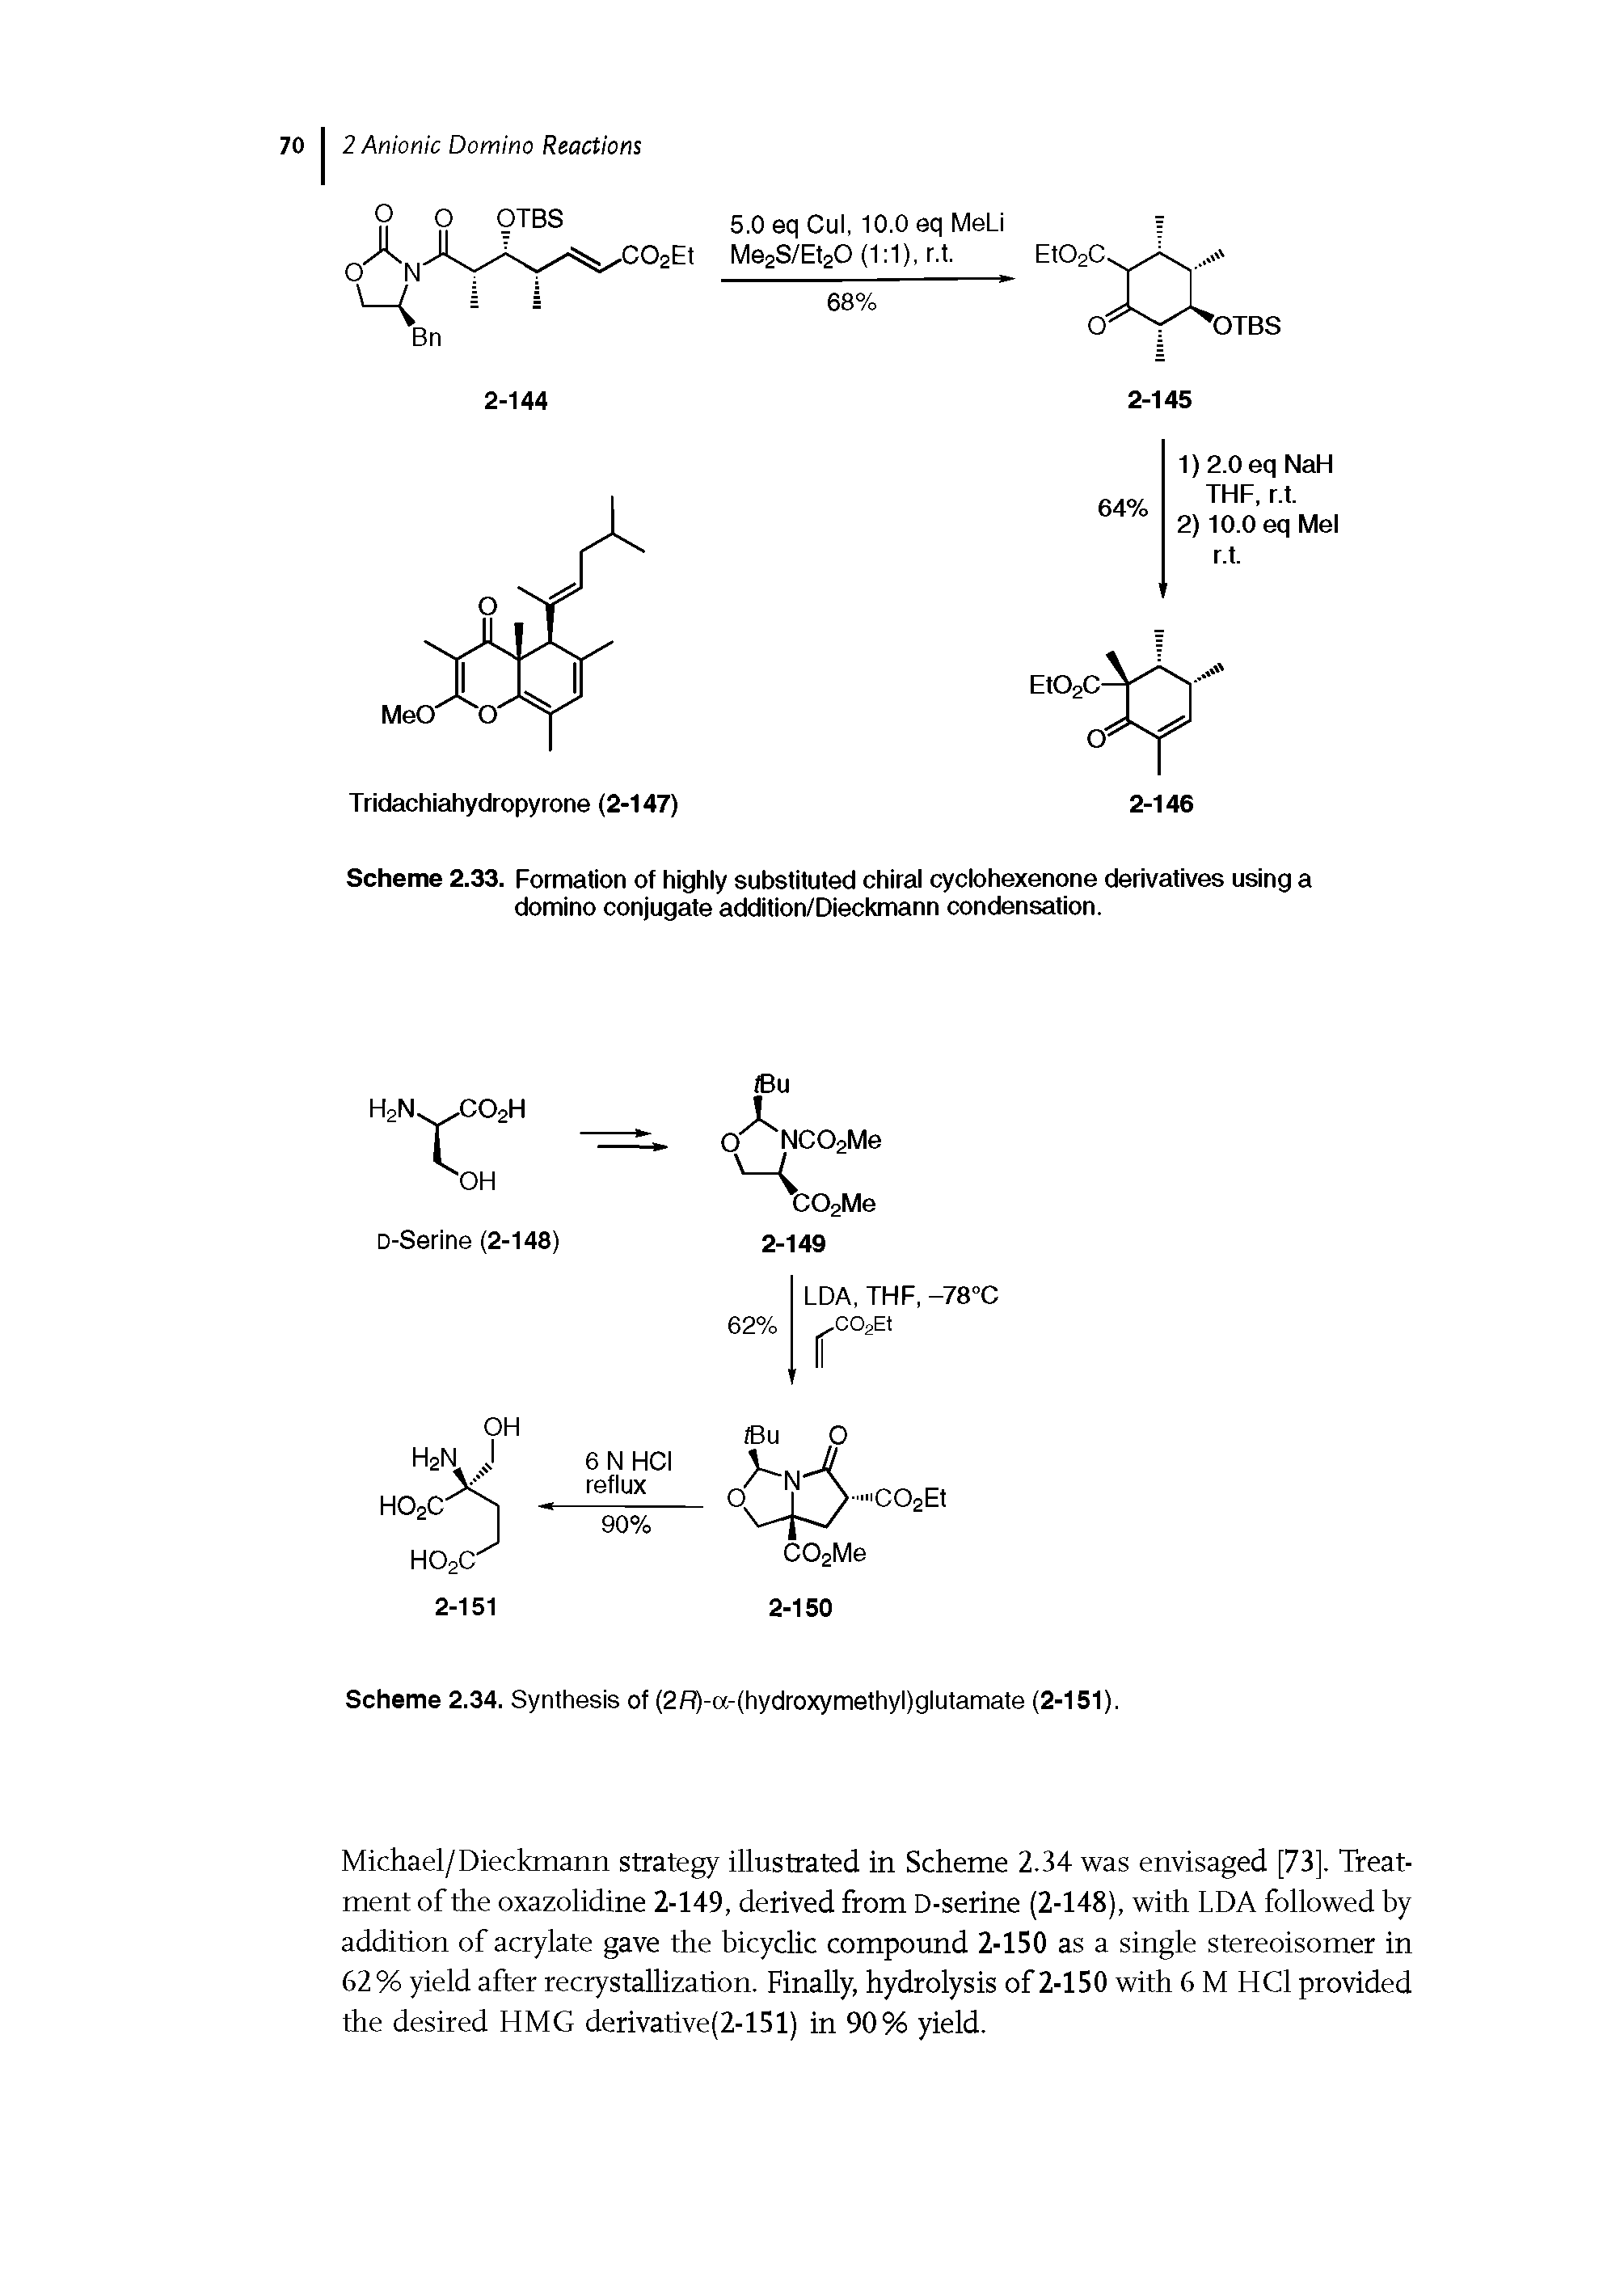 Scheme 2.33. Formation of highly substituted chiral cyclohexenone derivatives using a domino conjugate addition/Dieckmann condensation.